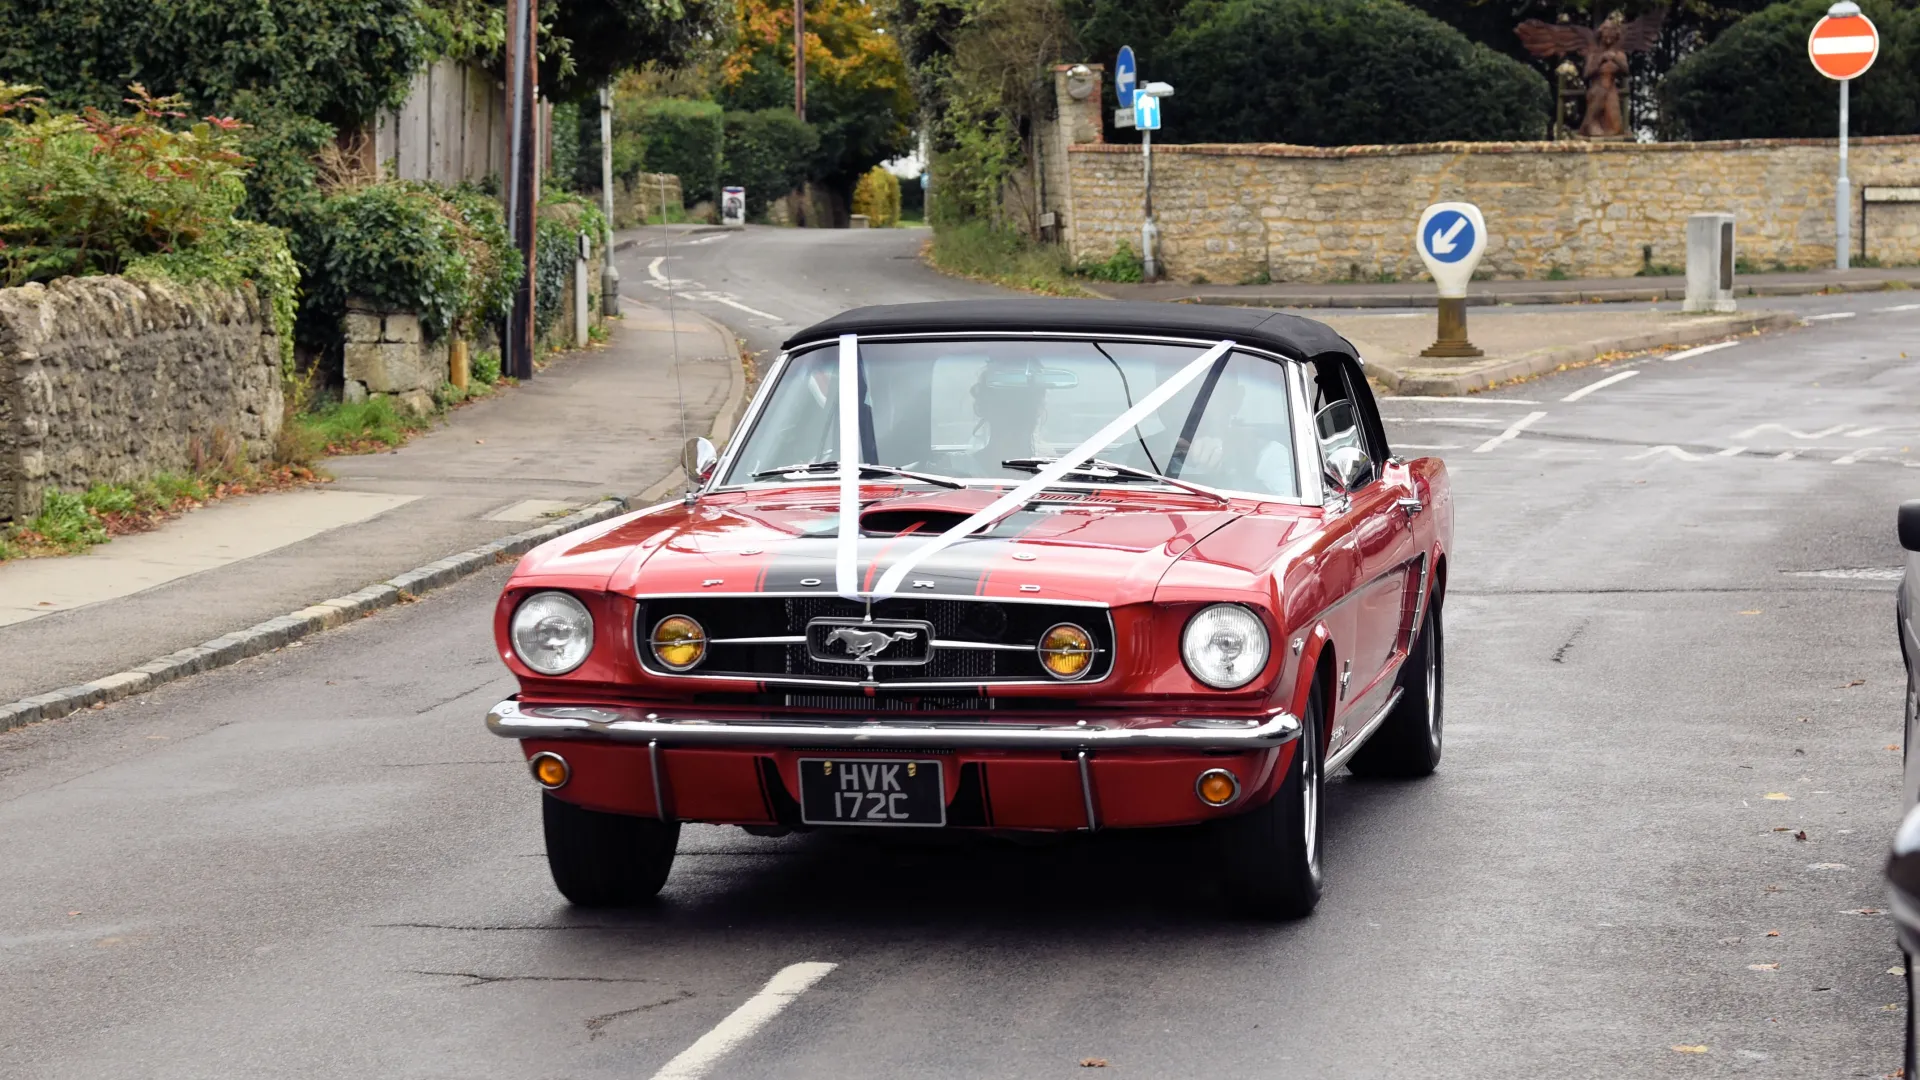 Ford Mustang Convertible decorated with white ribbons and soft-top black roof close.